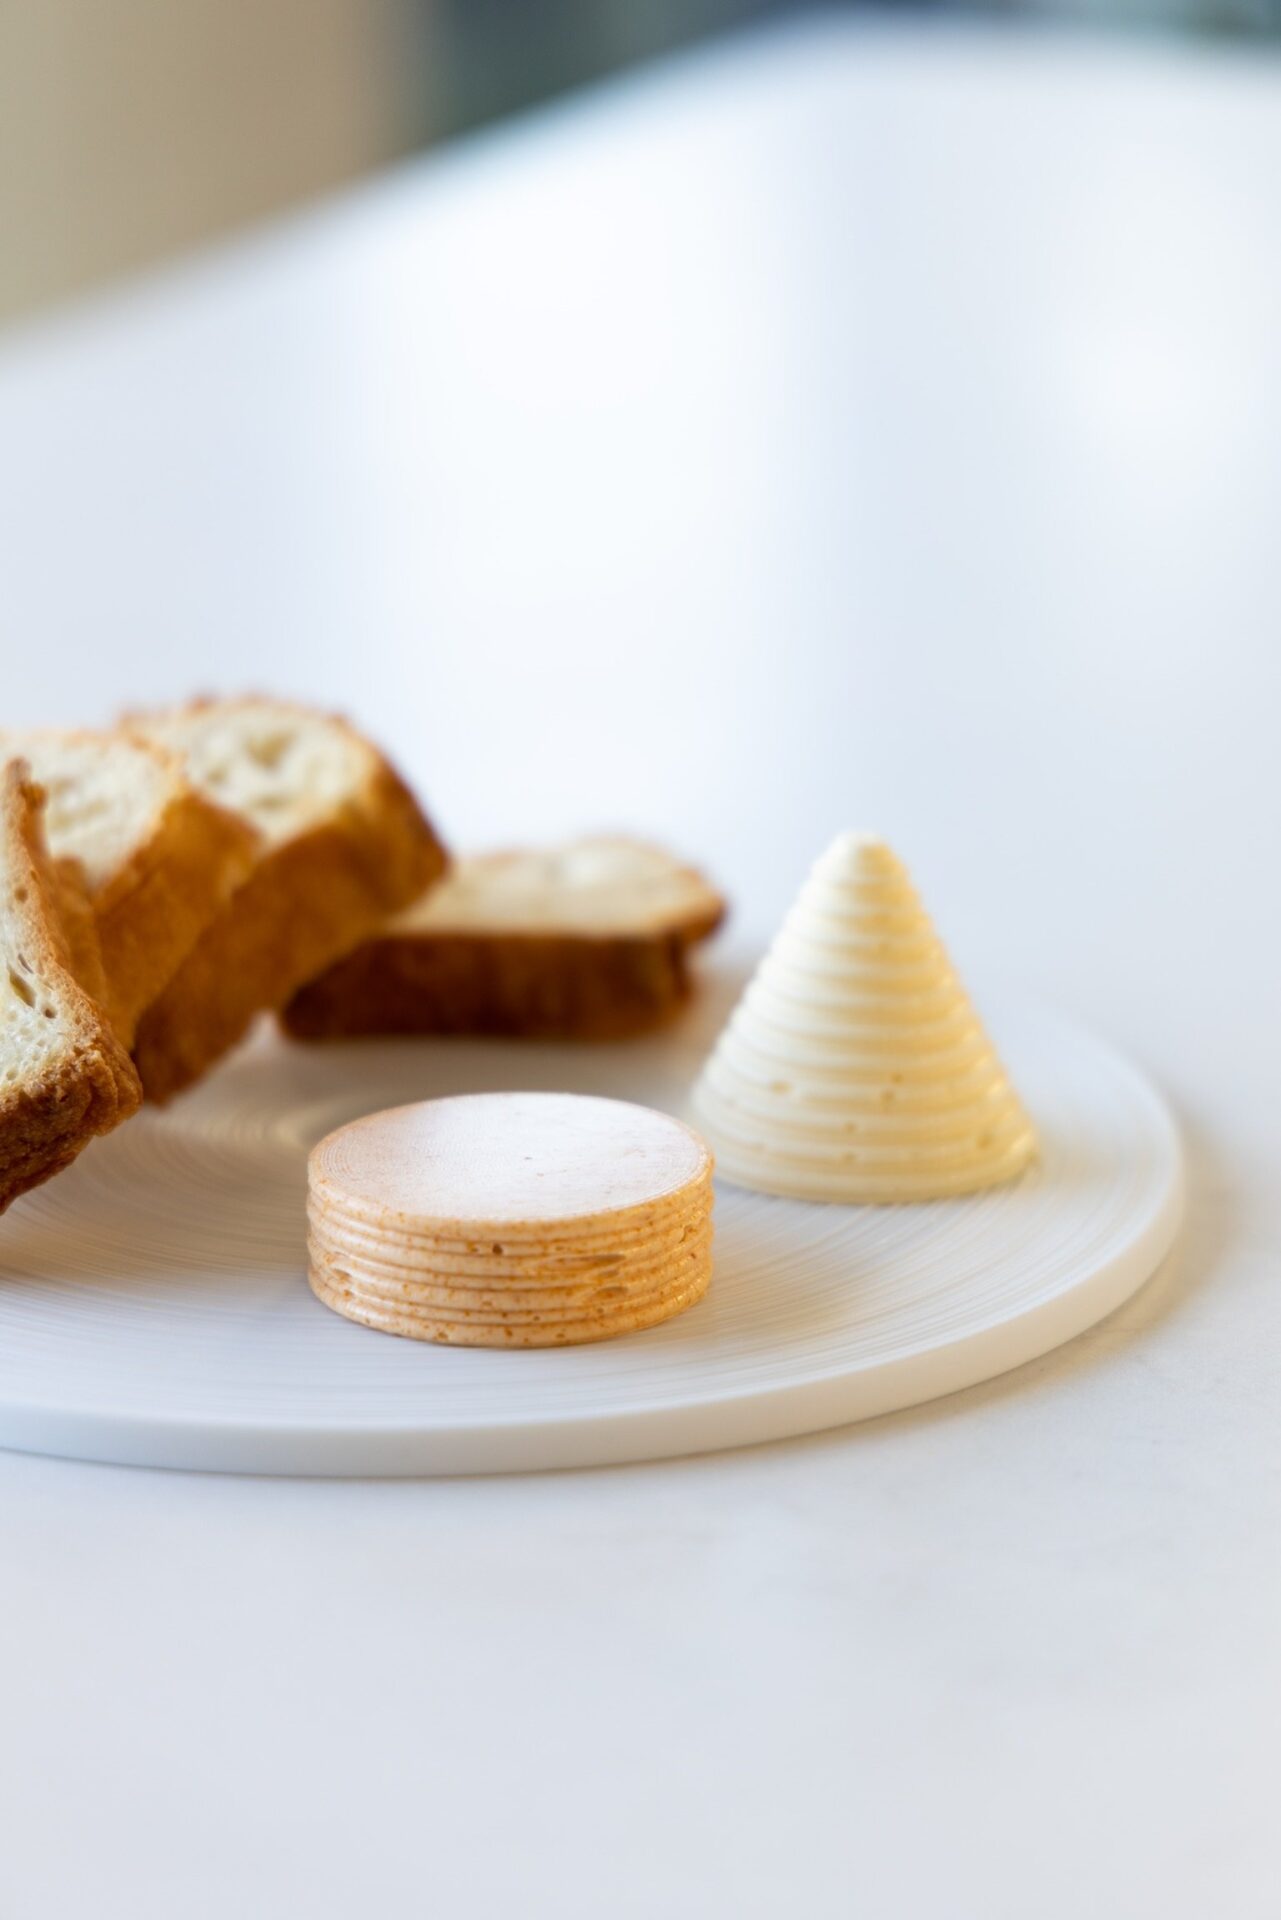 Butter Mold Cone